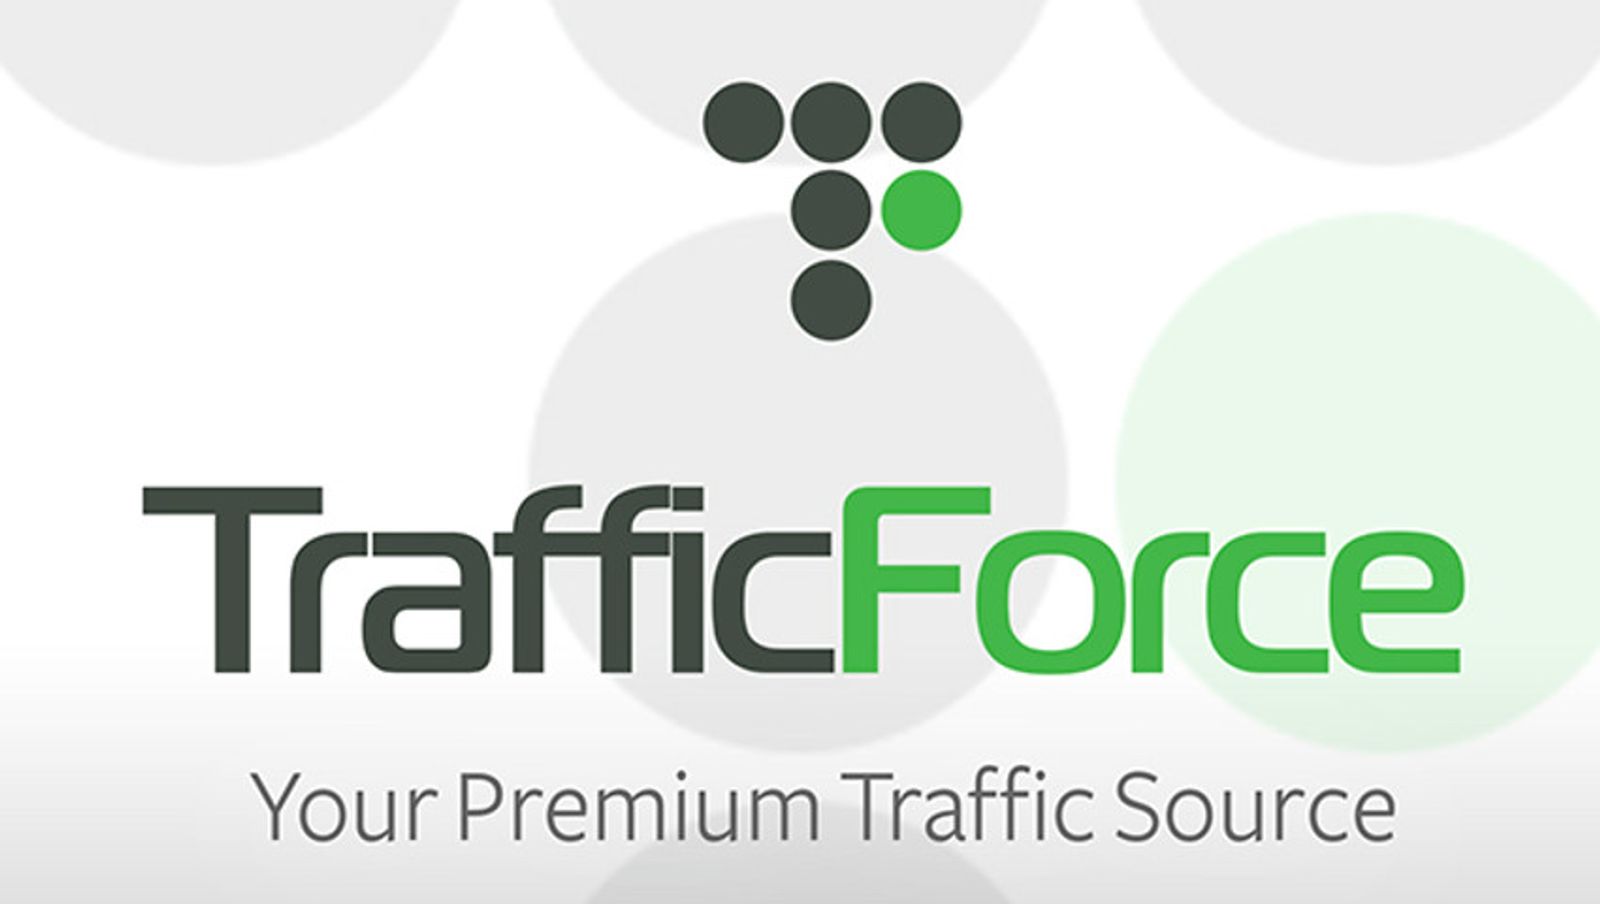 Traffic Force Upgrades Advertiser Panel With Big Data Features